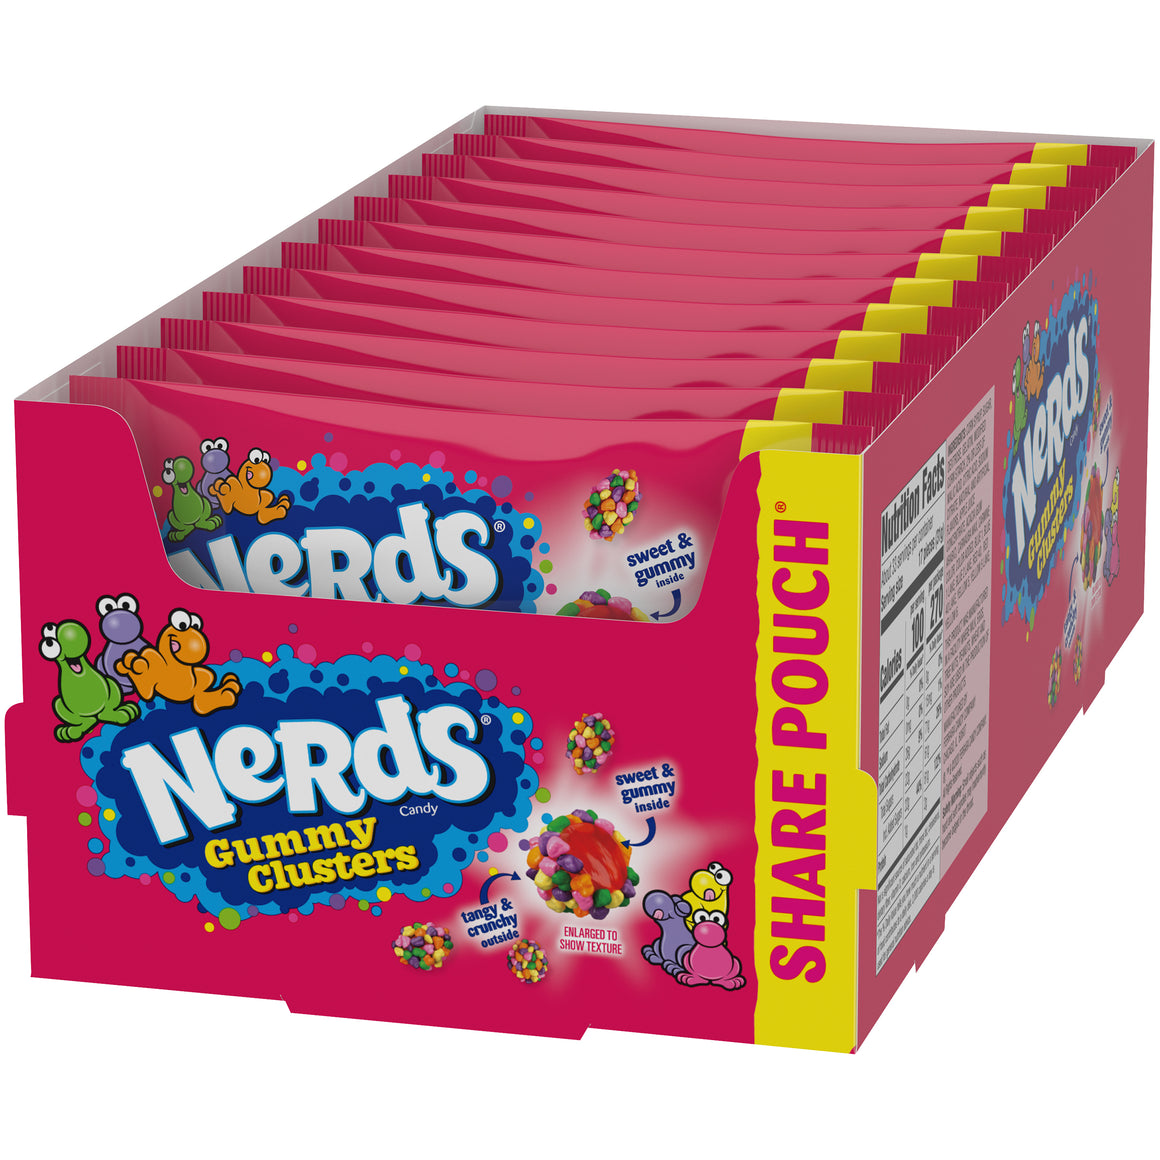 All City Candy Nerds Gummy Clusters 3 oz. Share Pack - Case of 12 Chewy Ferrara Candy Company For fresh candy and great service, visit www.allcitycandy.com